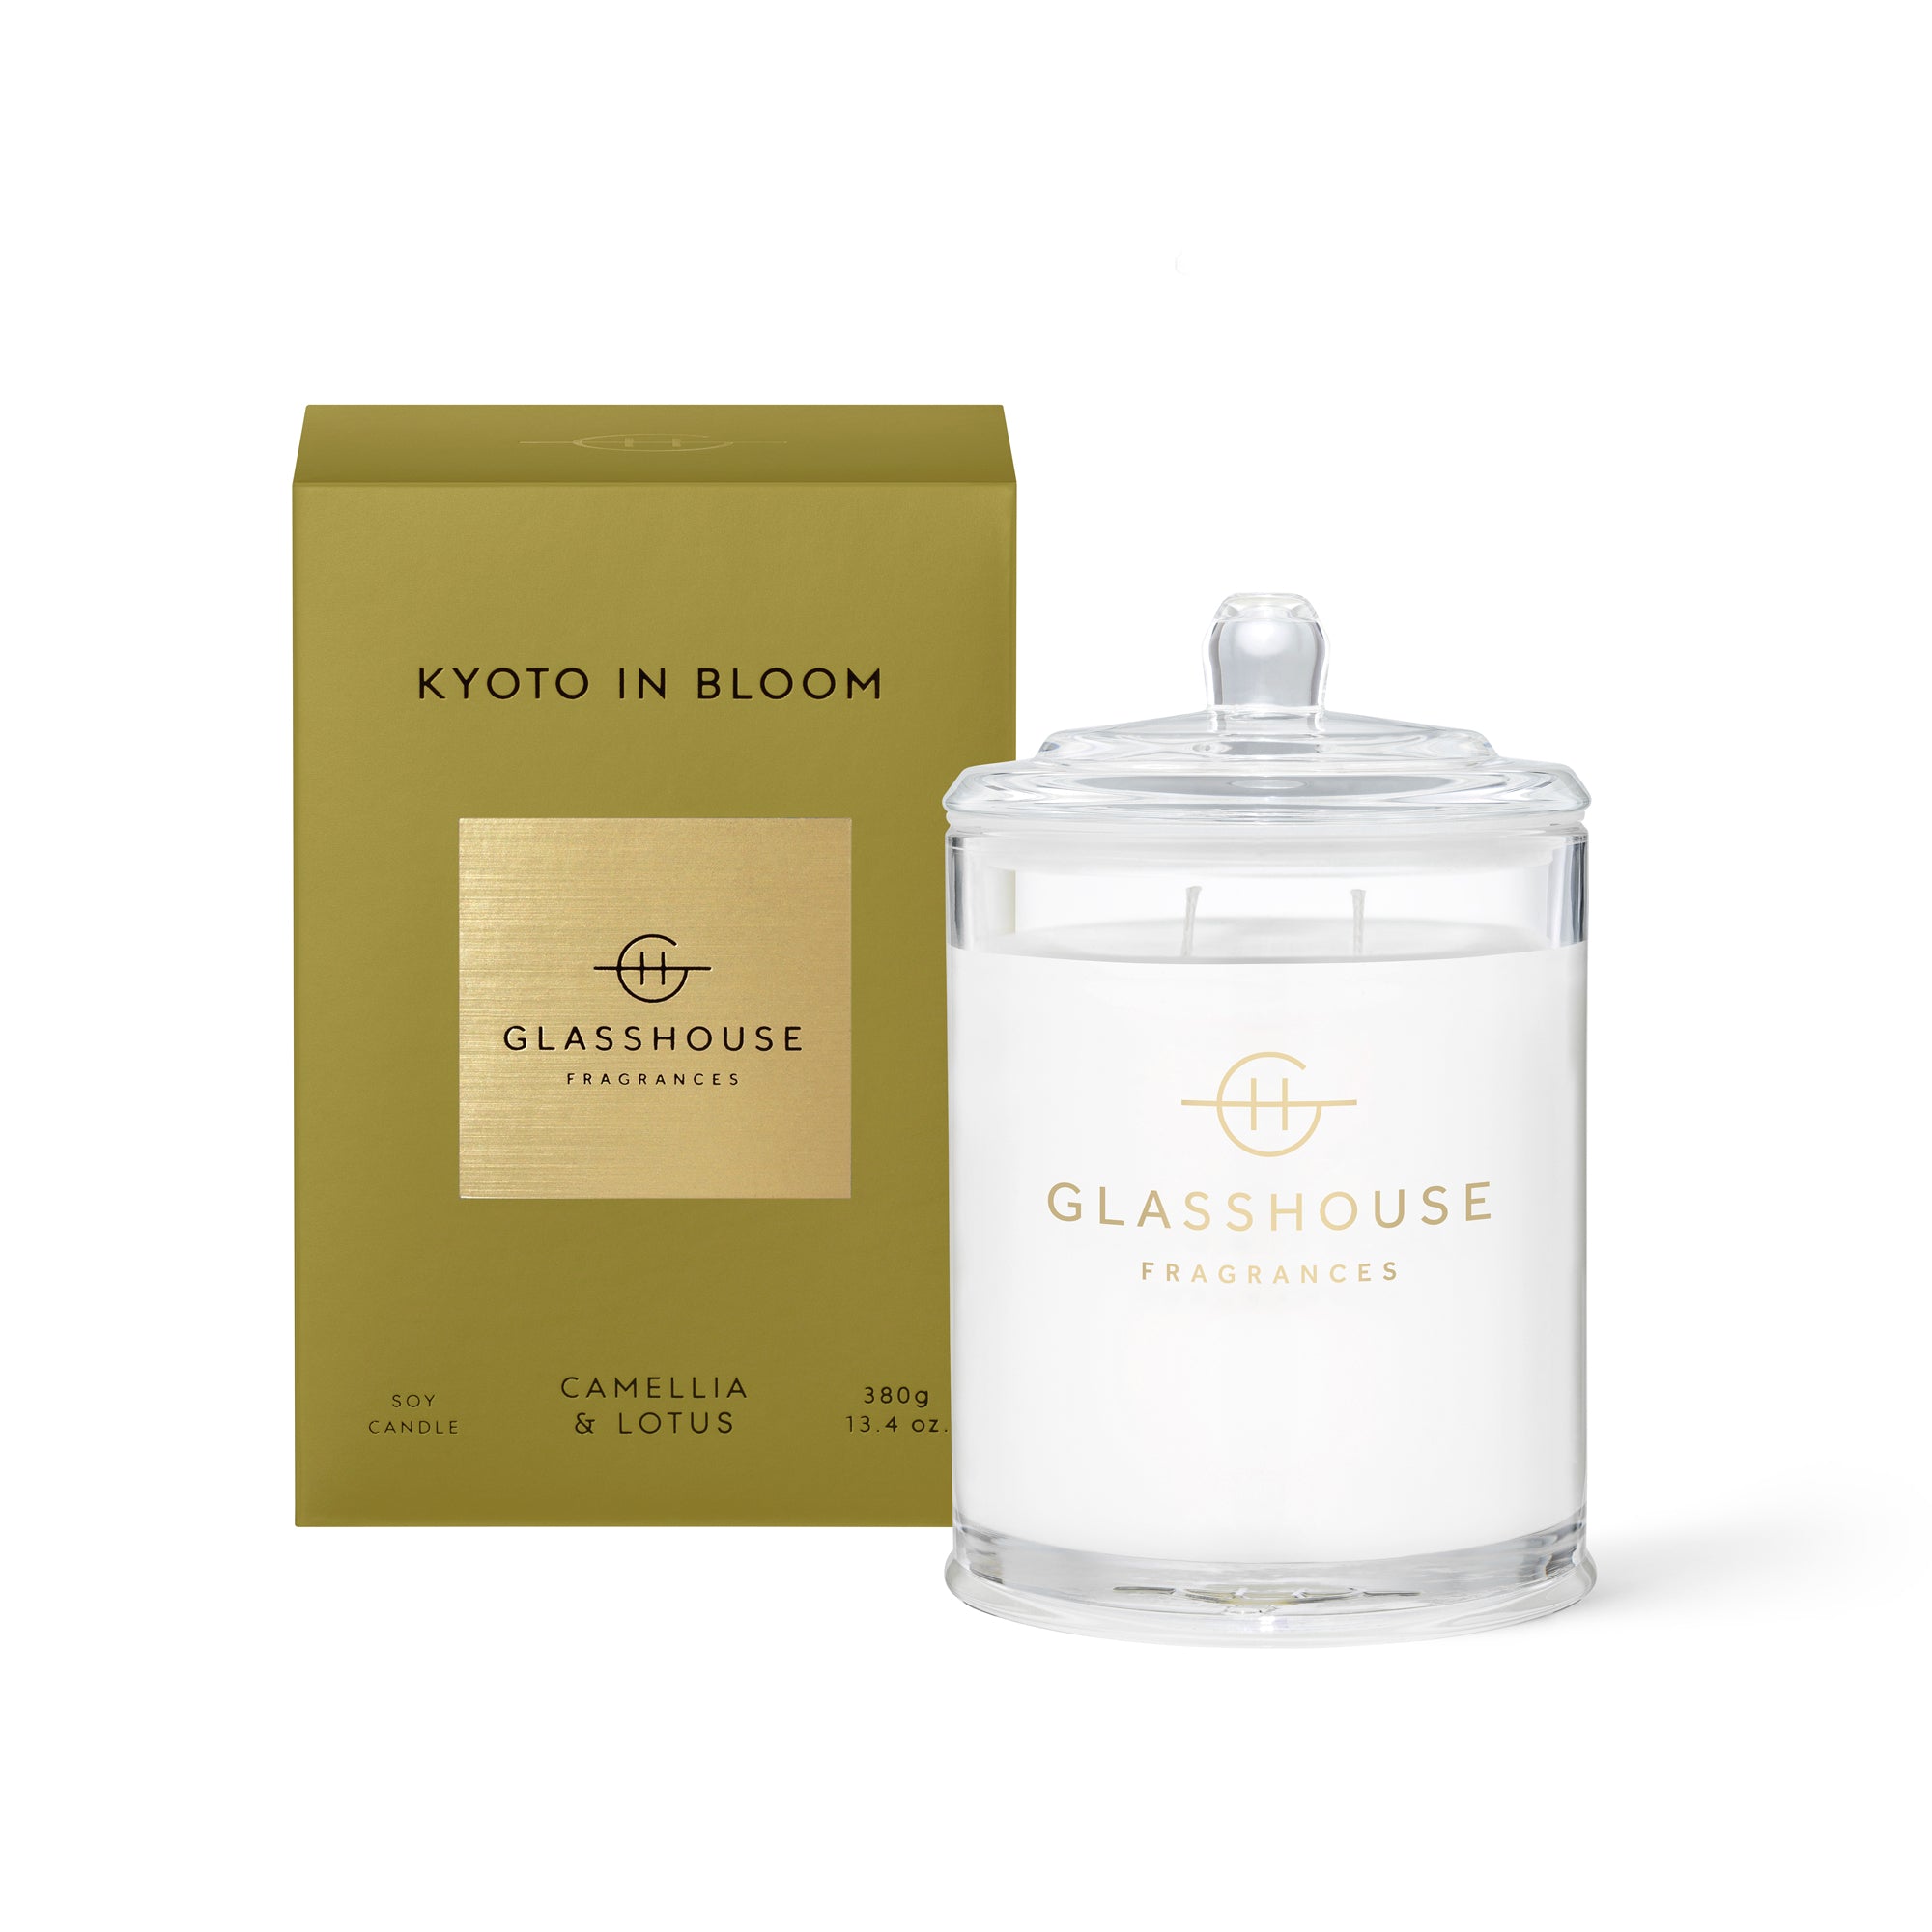 Glasshouse Kyoto In Bloom Candle 380g - Exquisite Laser Clinic